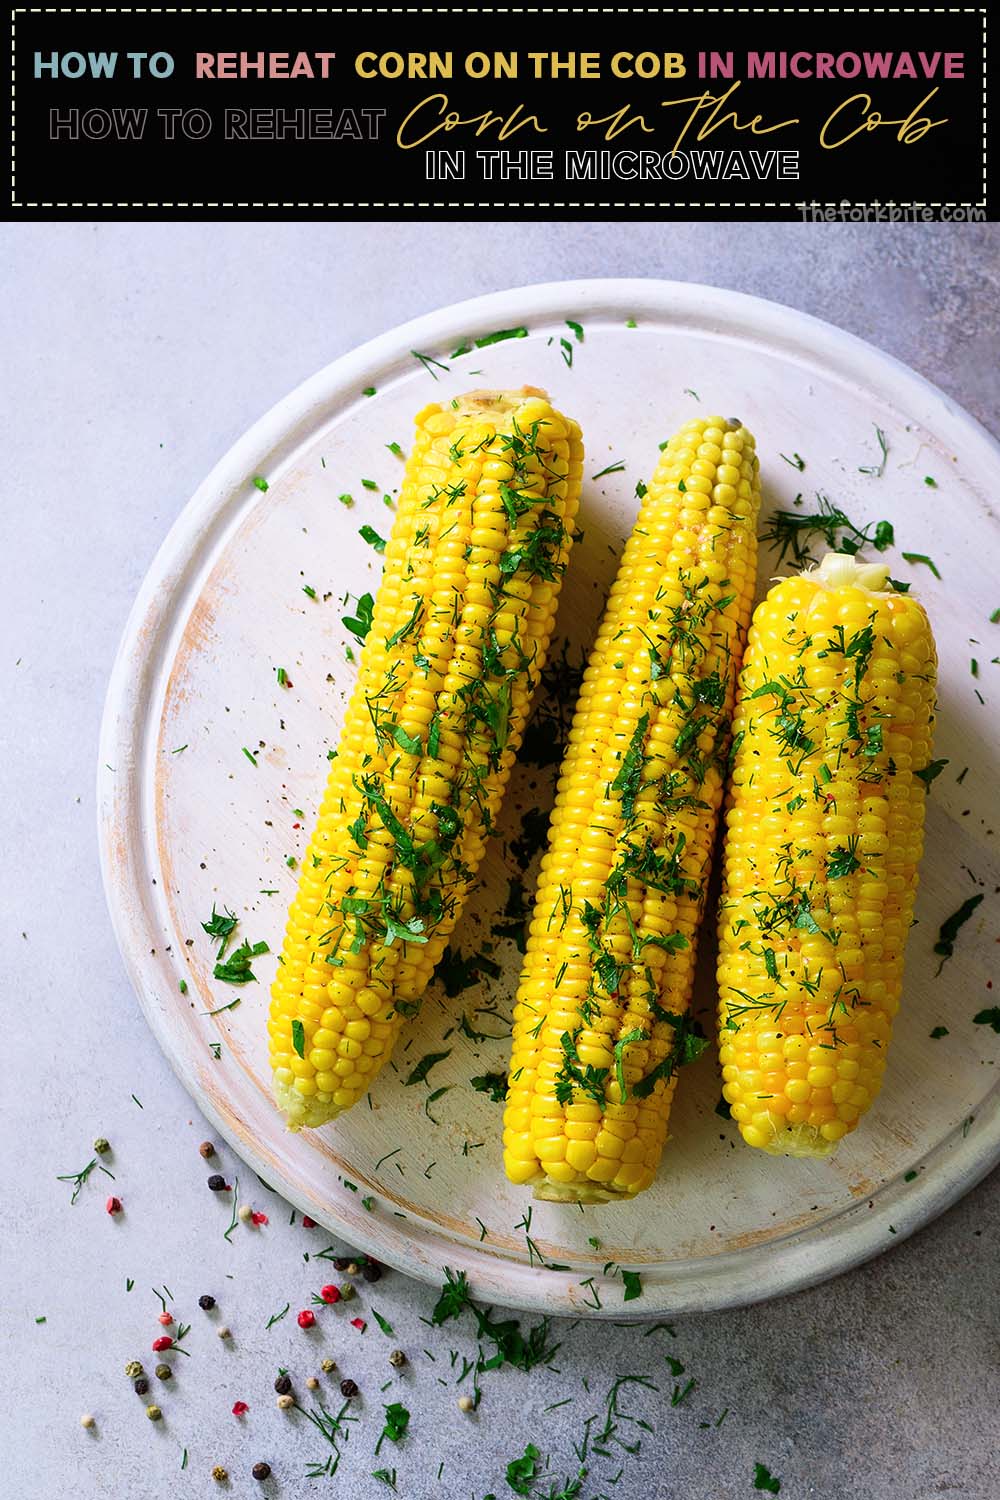 How to reheat corn on the cob in the microwave? Learn how to heat up corn so it's juicy and sweet not overcook.